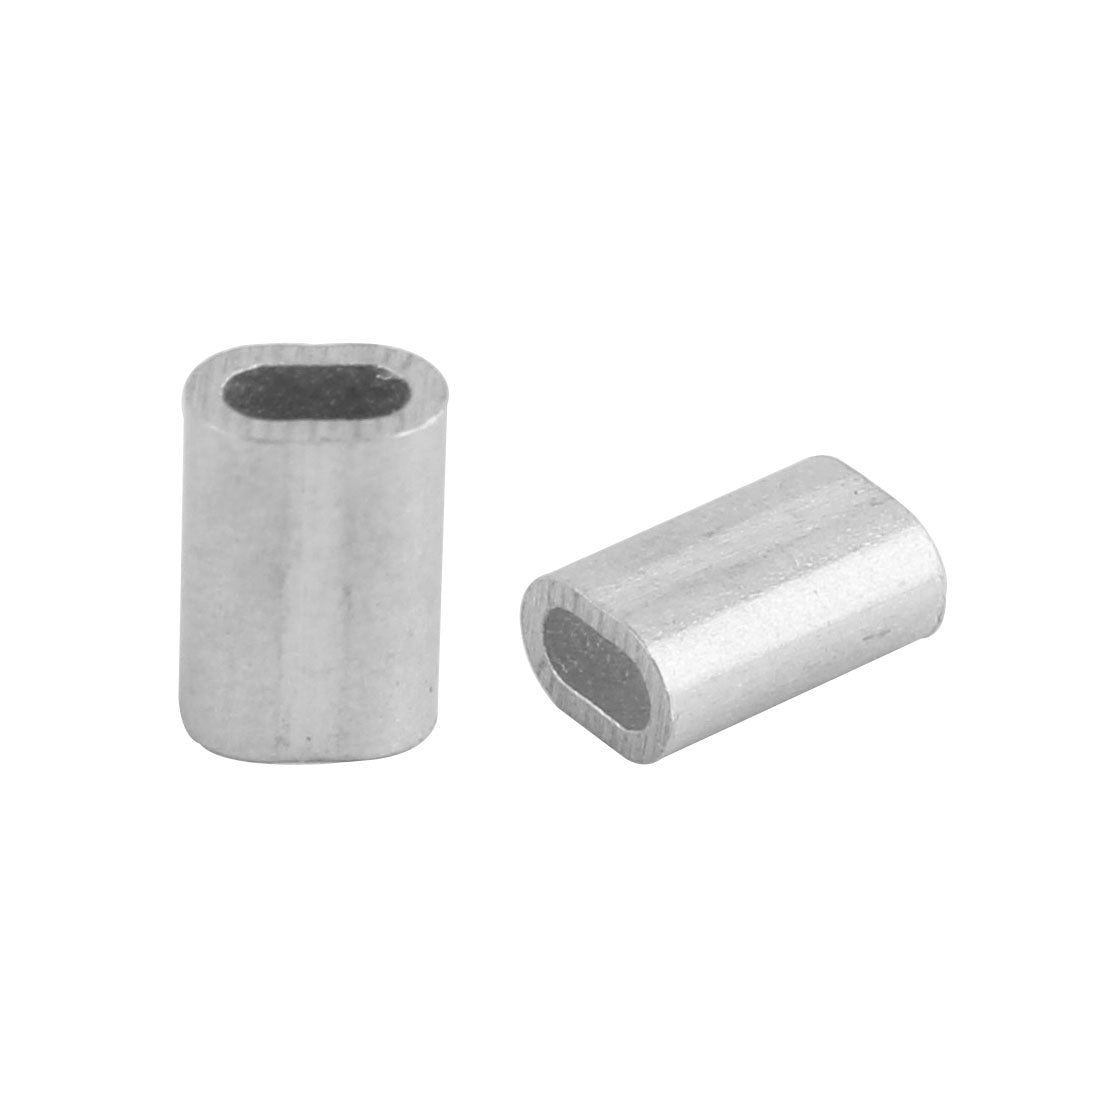 uxcell Uxcell Aluminum Sleeves Clip Fittings 5mm x 3mm Silver Tone 100pcs for 1.5mm Diameter Steel Wire Rope